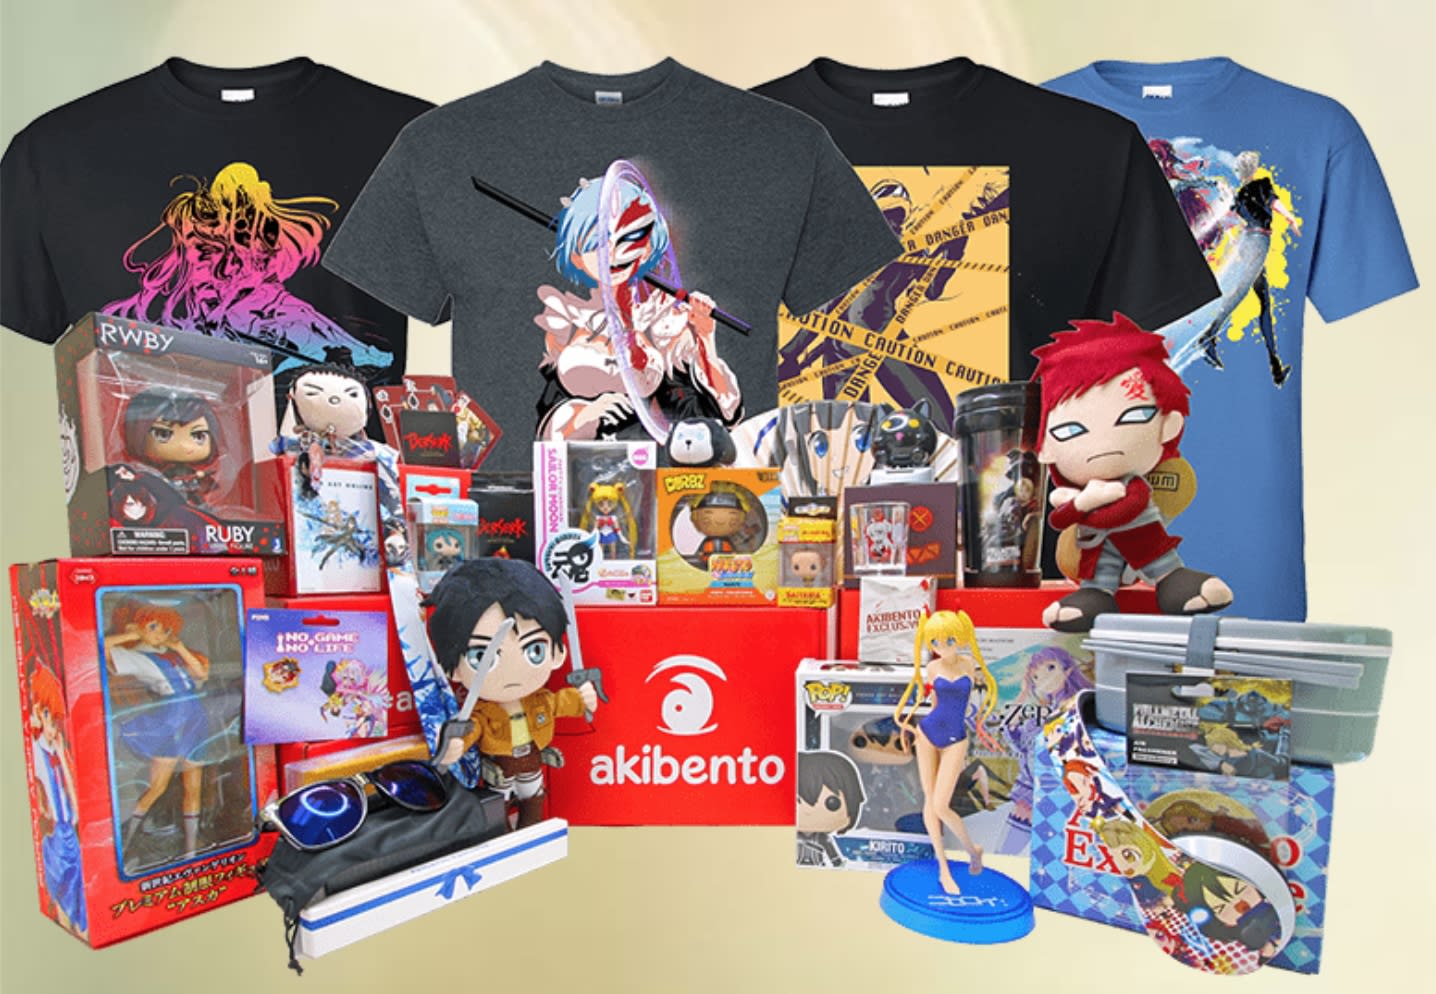 Loot Anime by Loot Crate - Guts or Griffith?⚔️ Berserk is in this month's Loot  Anime Crate! 👉https://loot.cr/thinkanime | Facebook